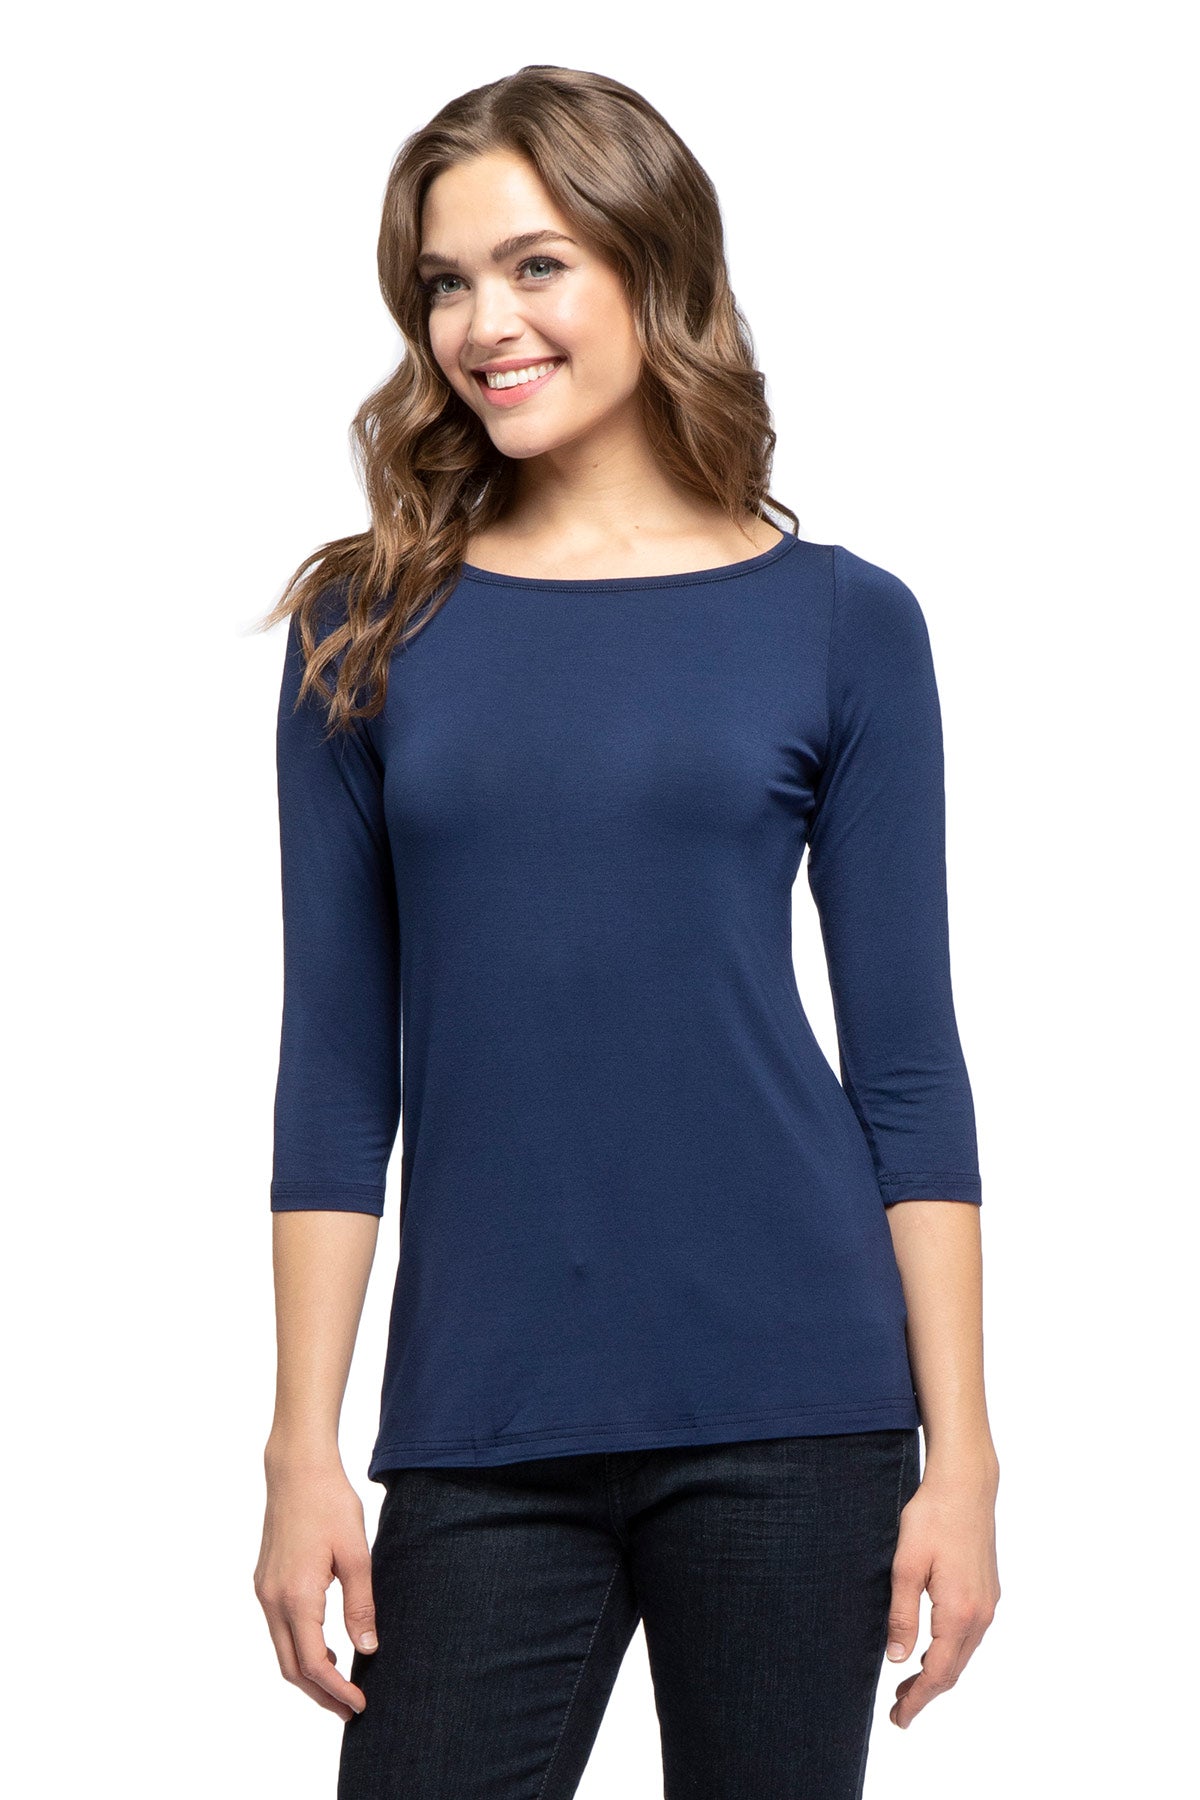 A woman standing and smiling with both hands at her sides, wearing Yala Kai Boatneck Three Quarter Sleeve Relaxed Fit Bamboo Tee Shirt in Navy